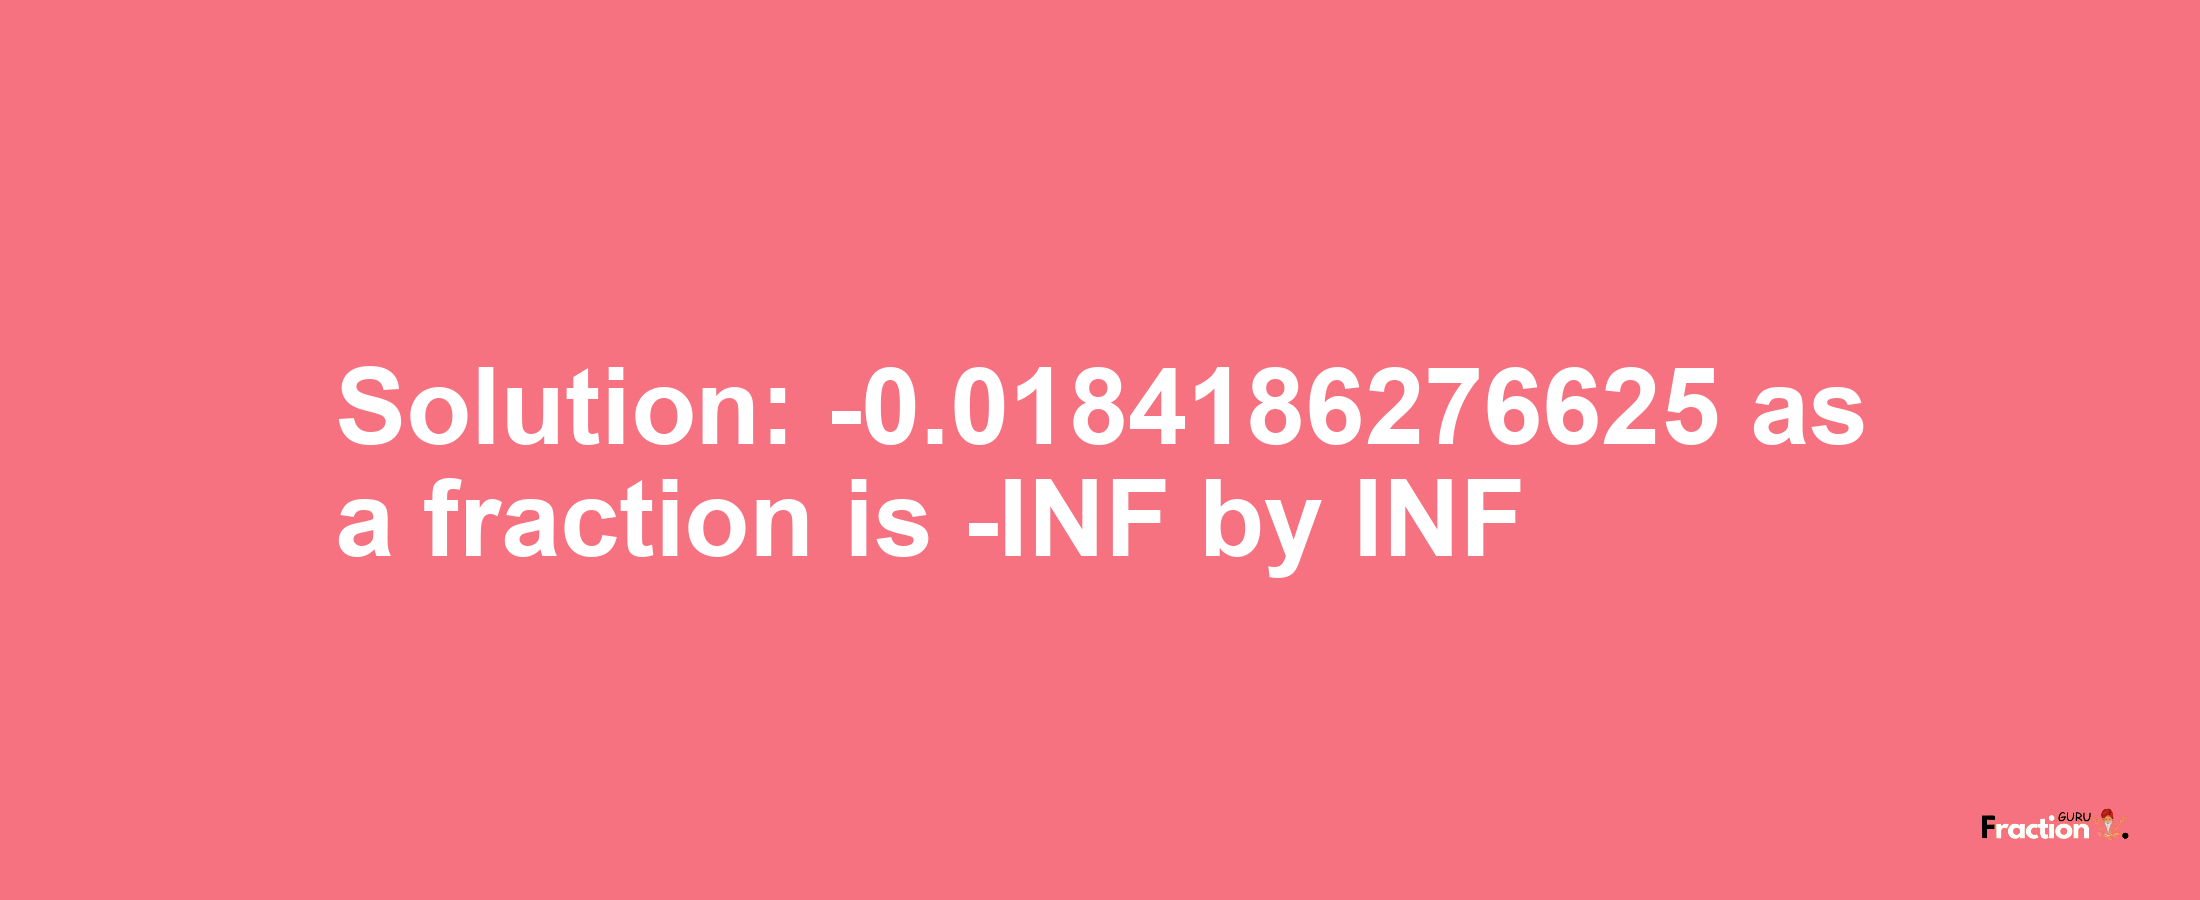 Solution:-0.0184186276625 as a fraction is -INF/INF